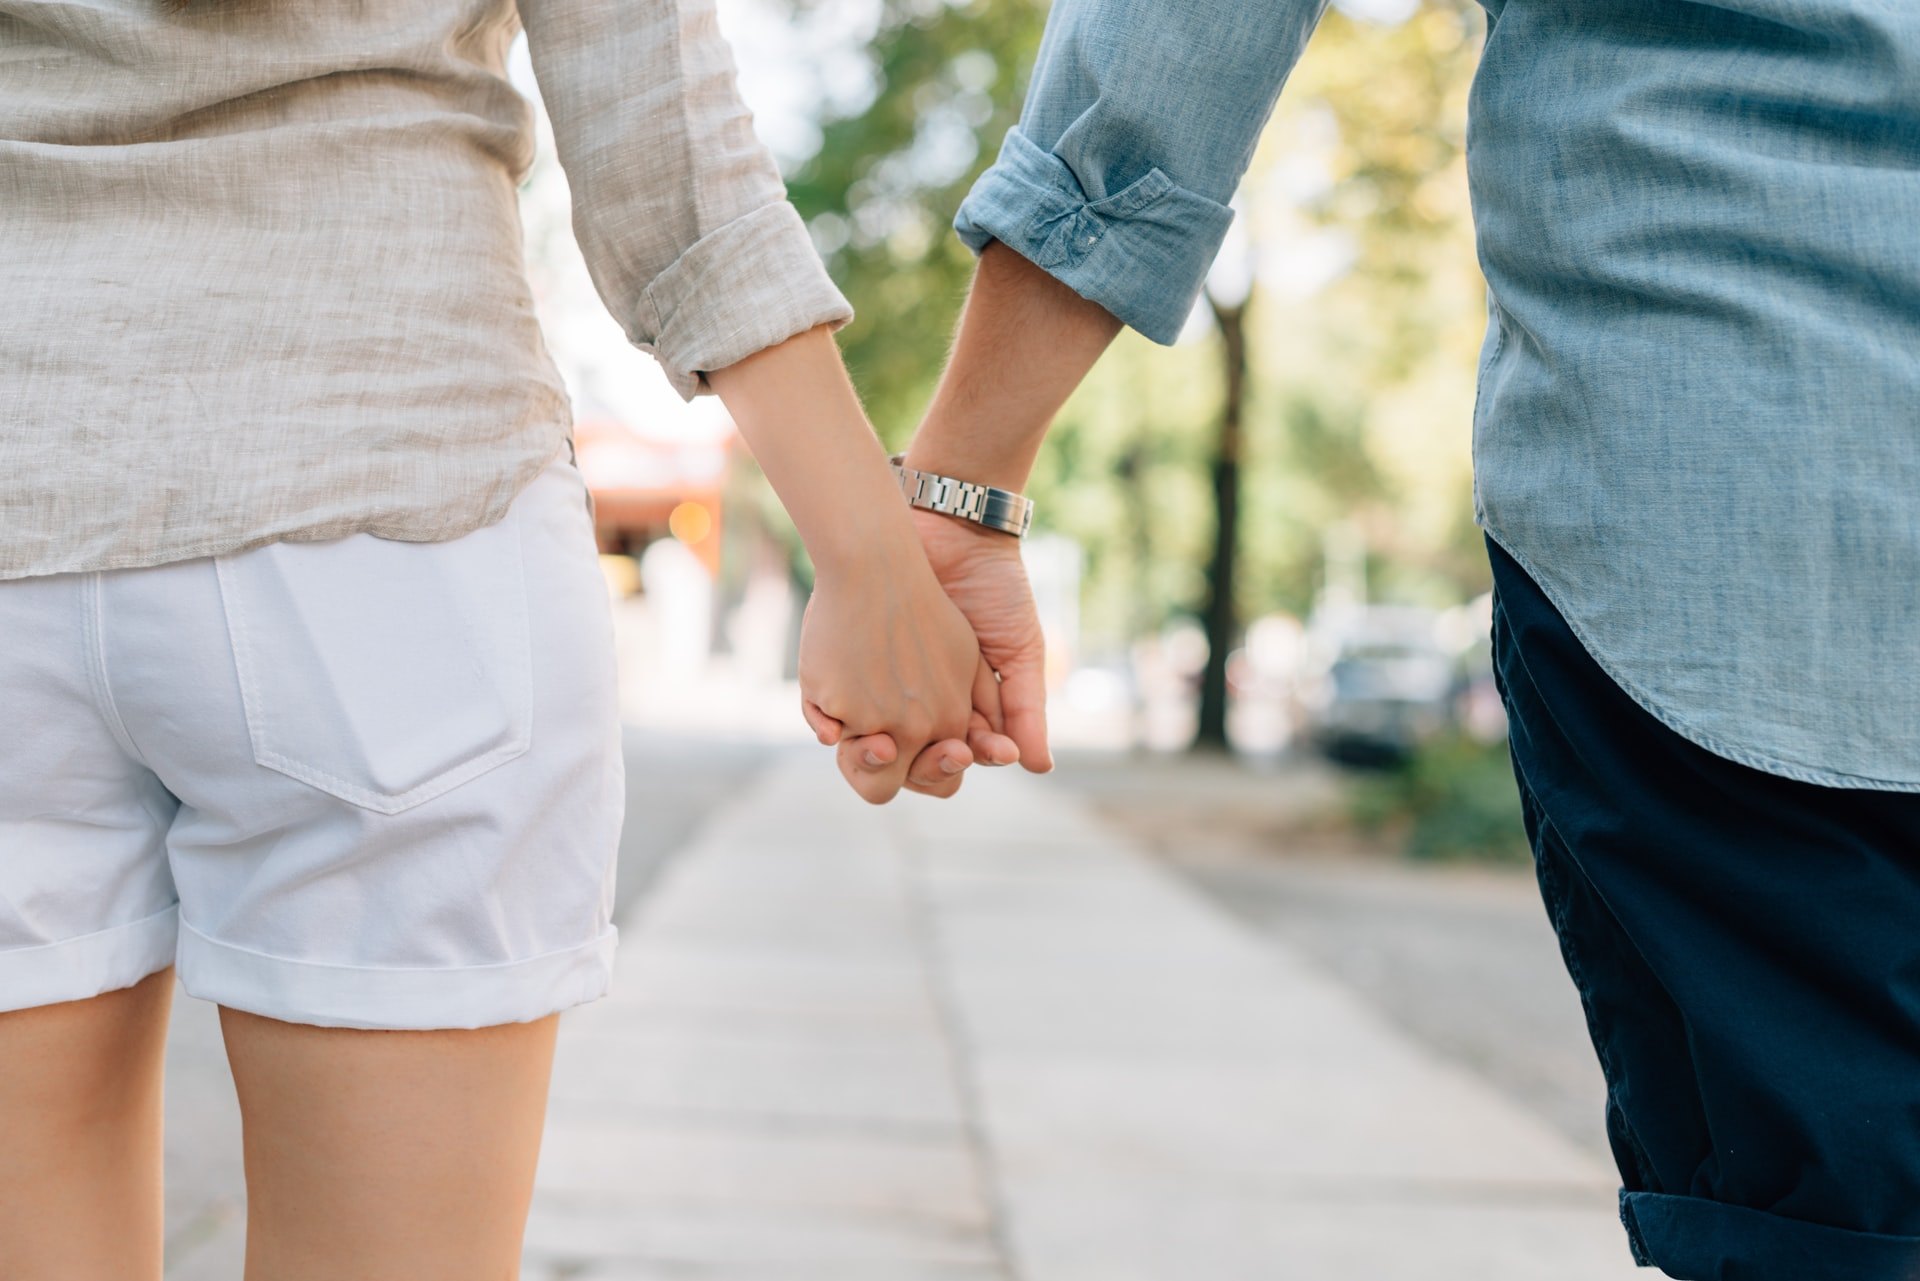 Tackle Finances as a Couple with the Honeydue App